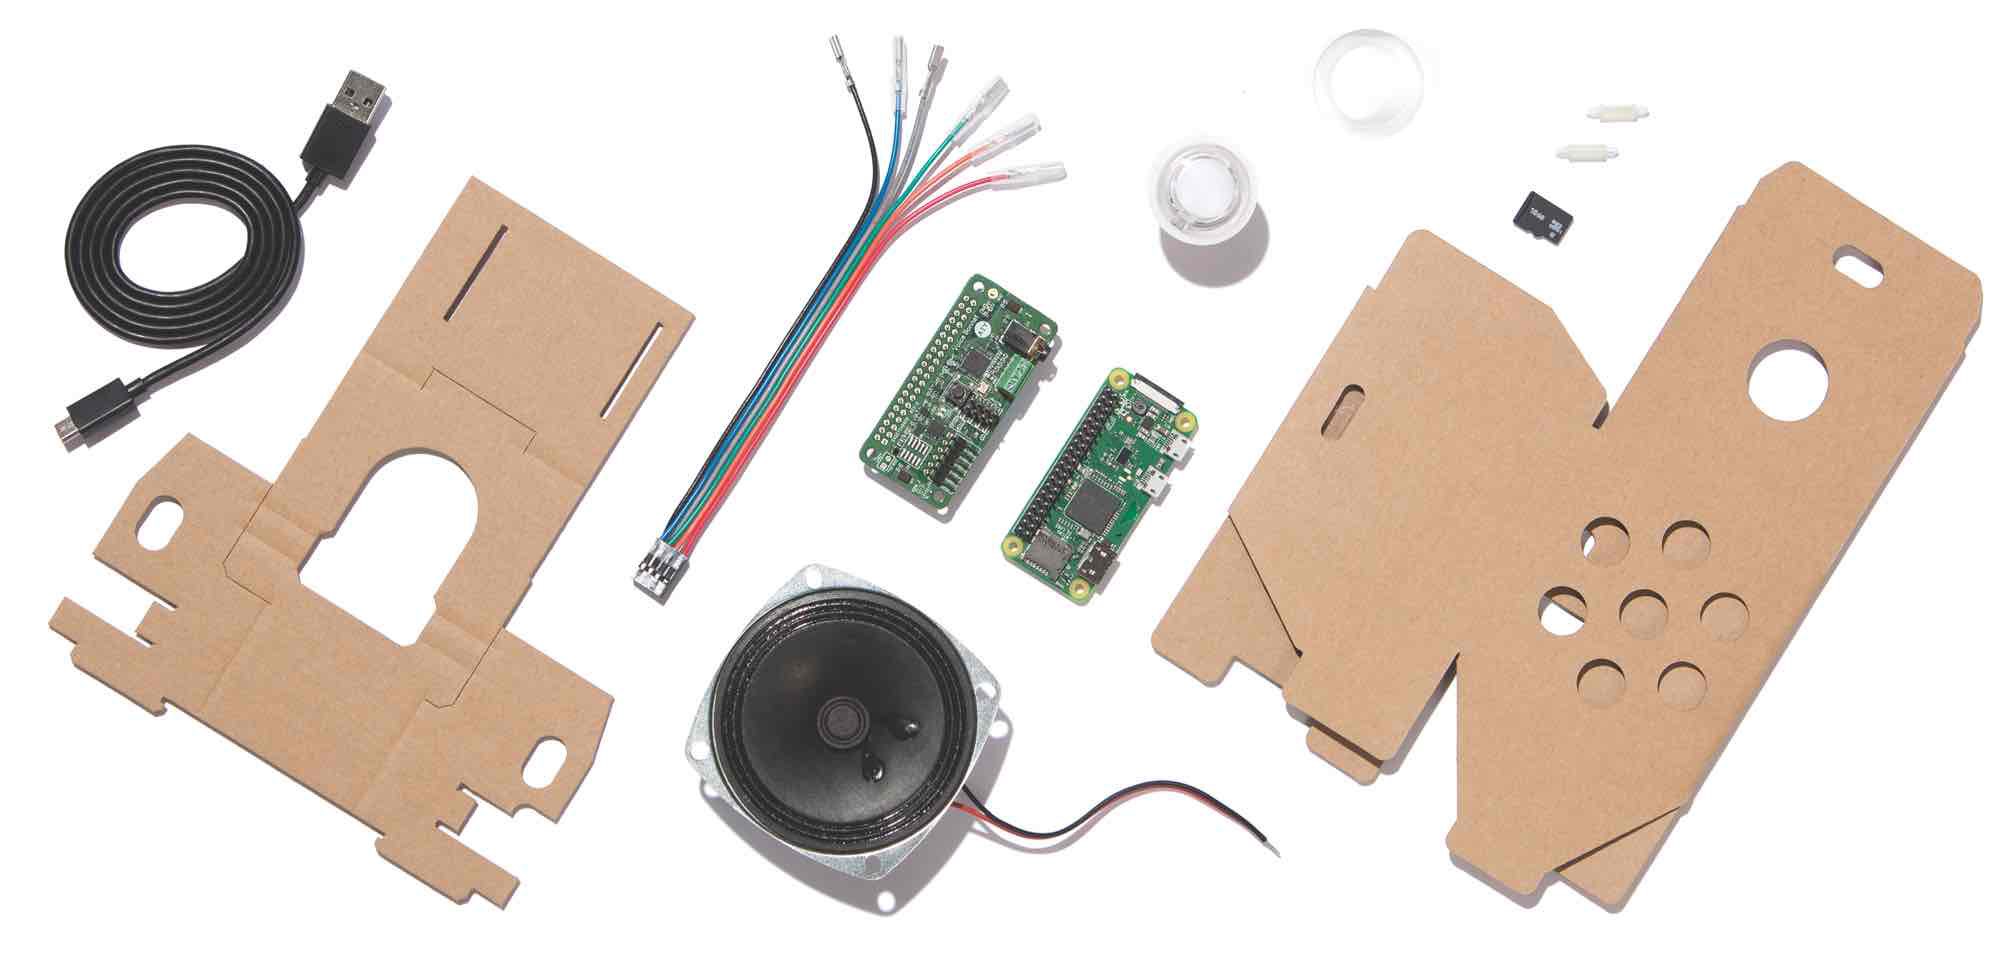 All the bits that come with the AIY Voice Kit, [https://aiyprojects.withgoogle.com/voice/#list-of-materials](https://aiyprojects.withgoogle.com/voice/#list-of-materials)